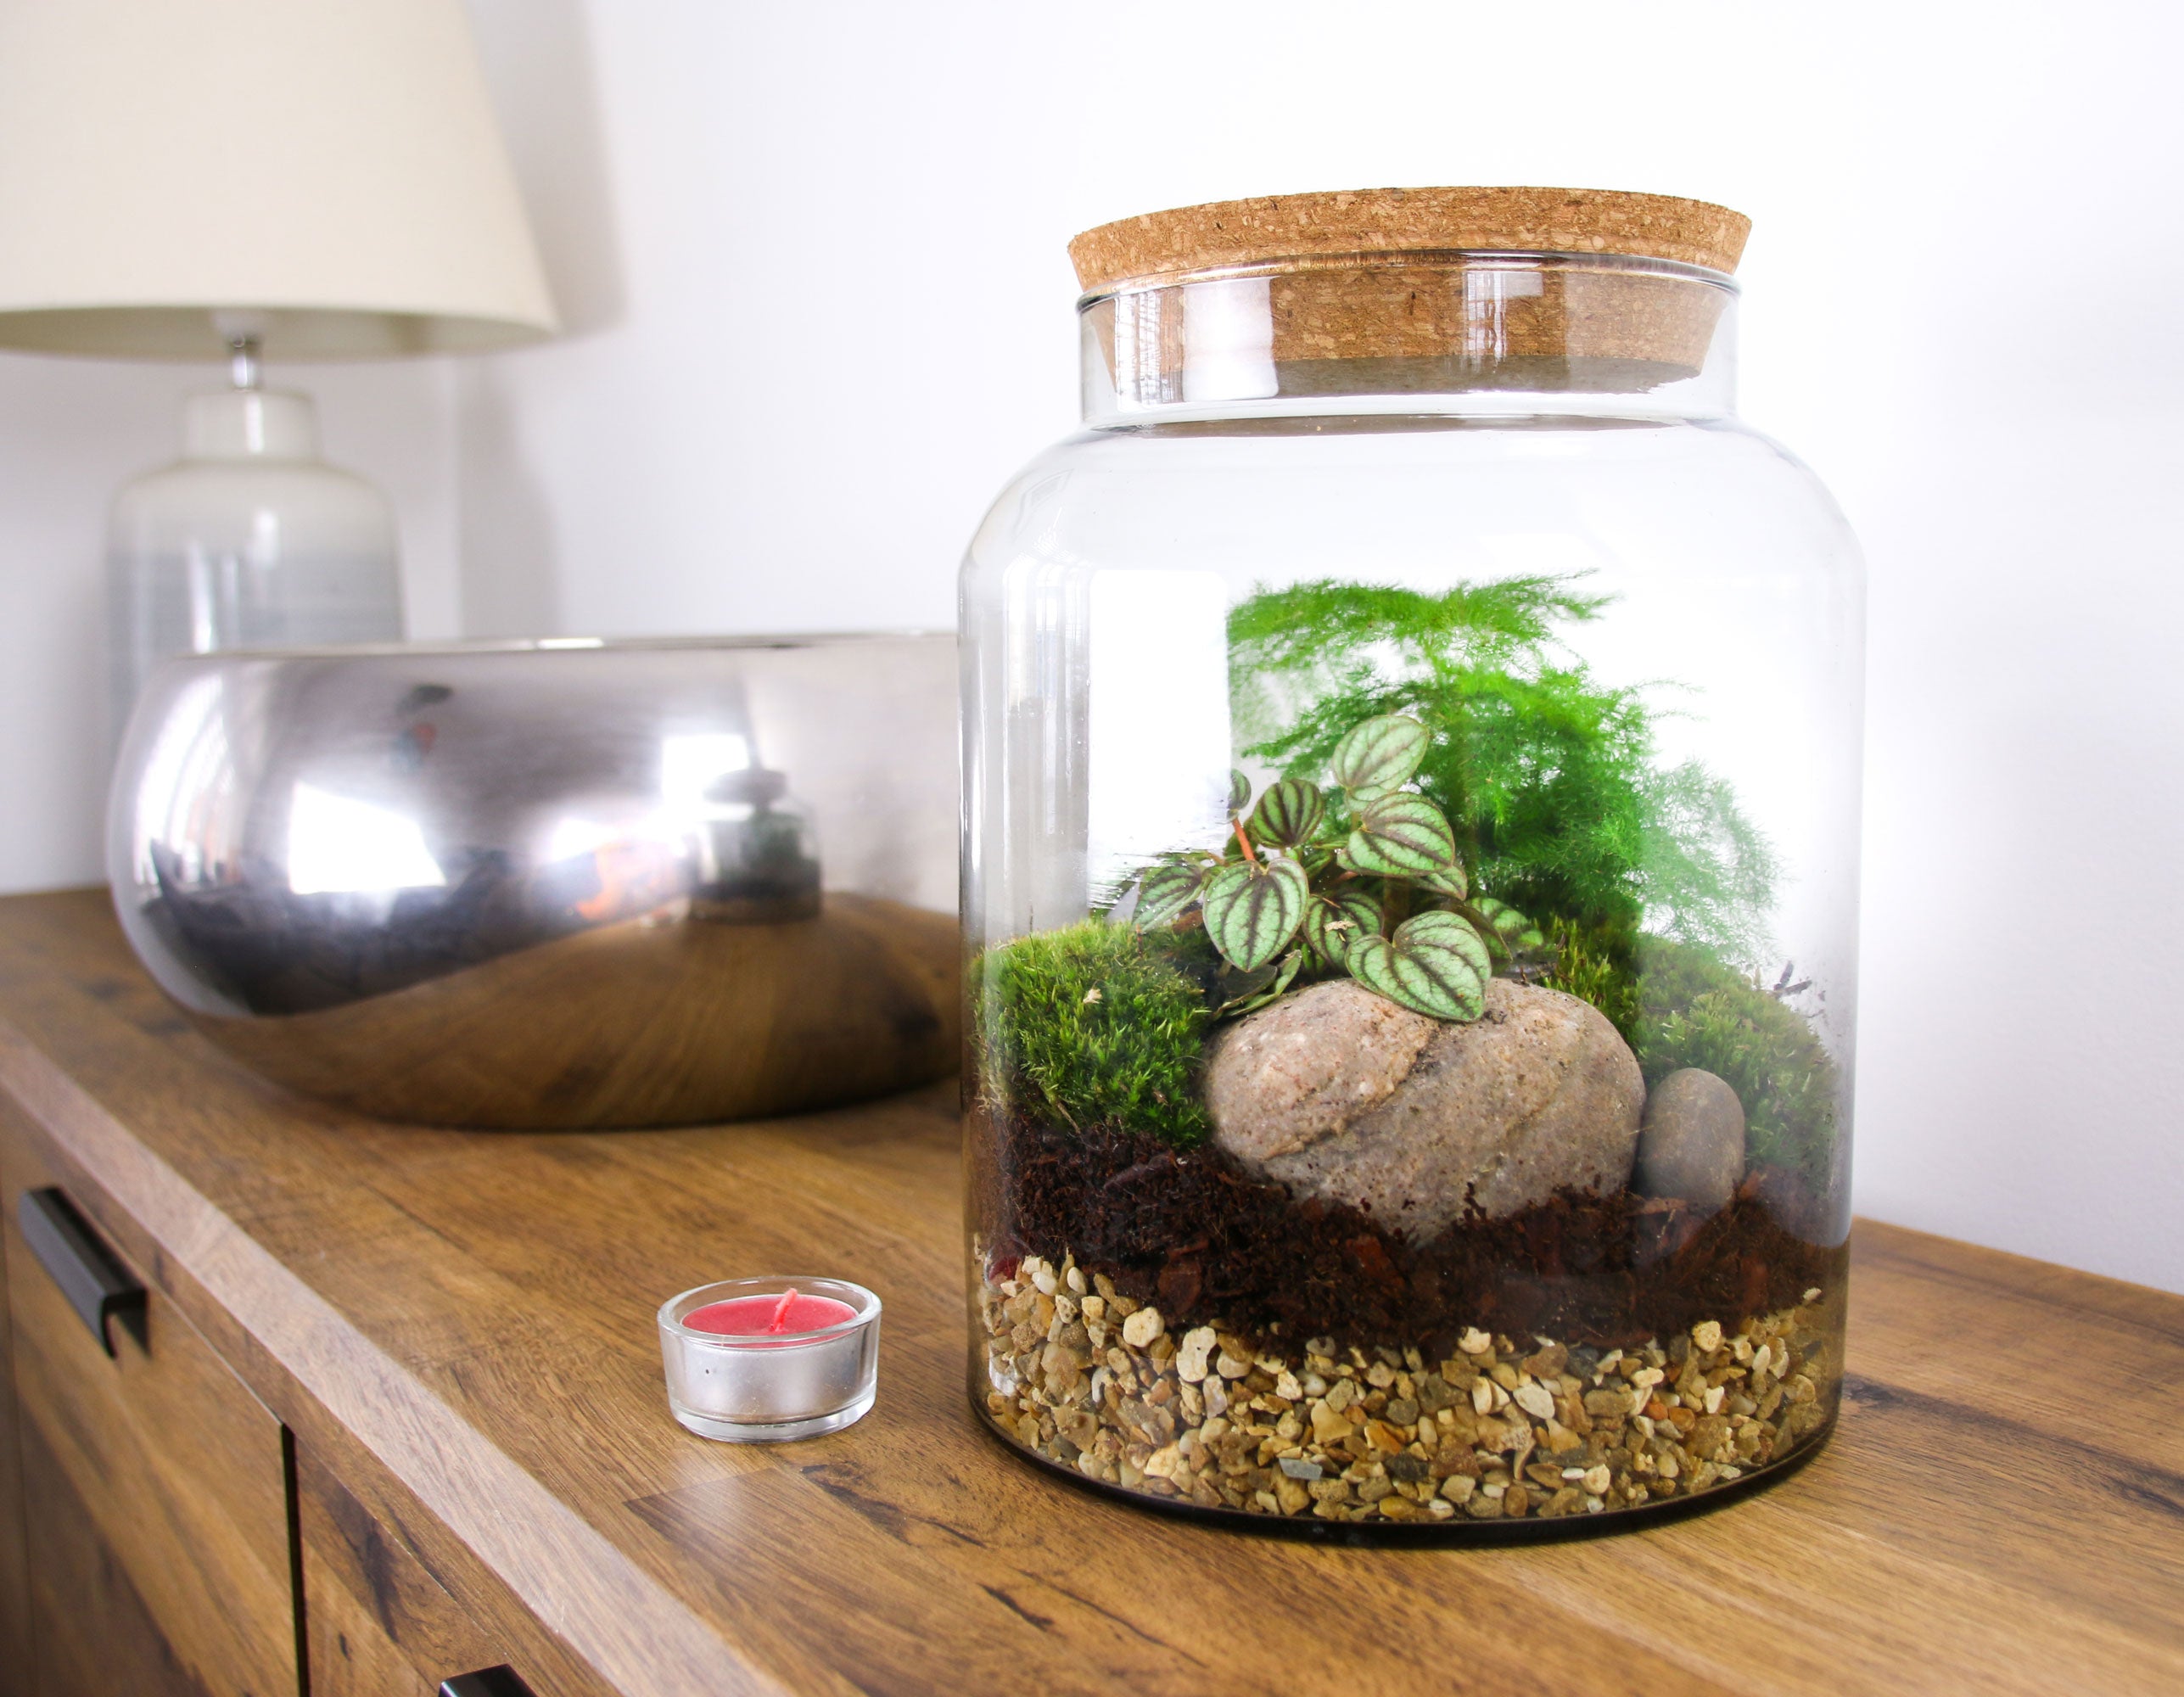 Terrarium kit delivered to your door in the UK with living plants